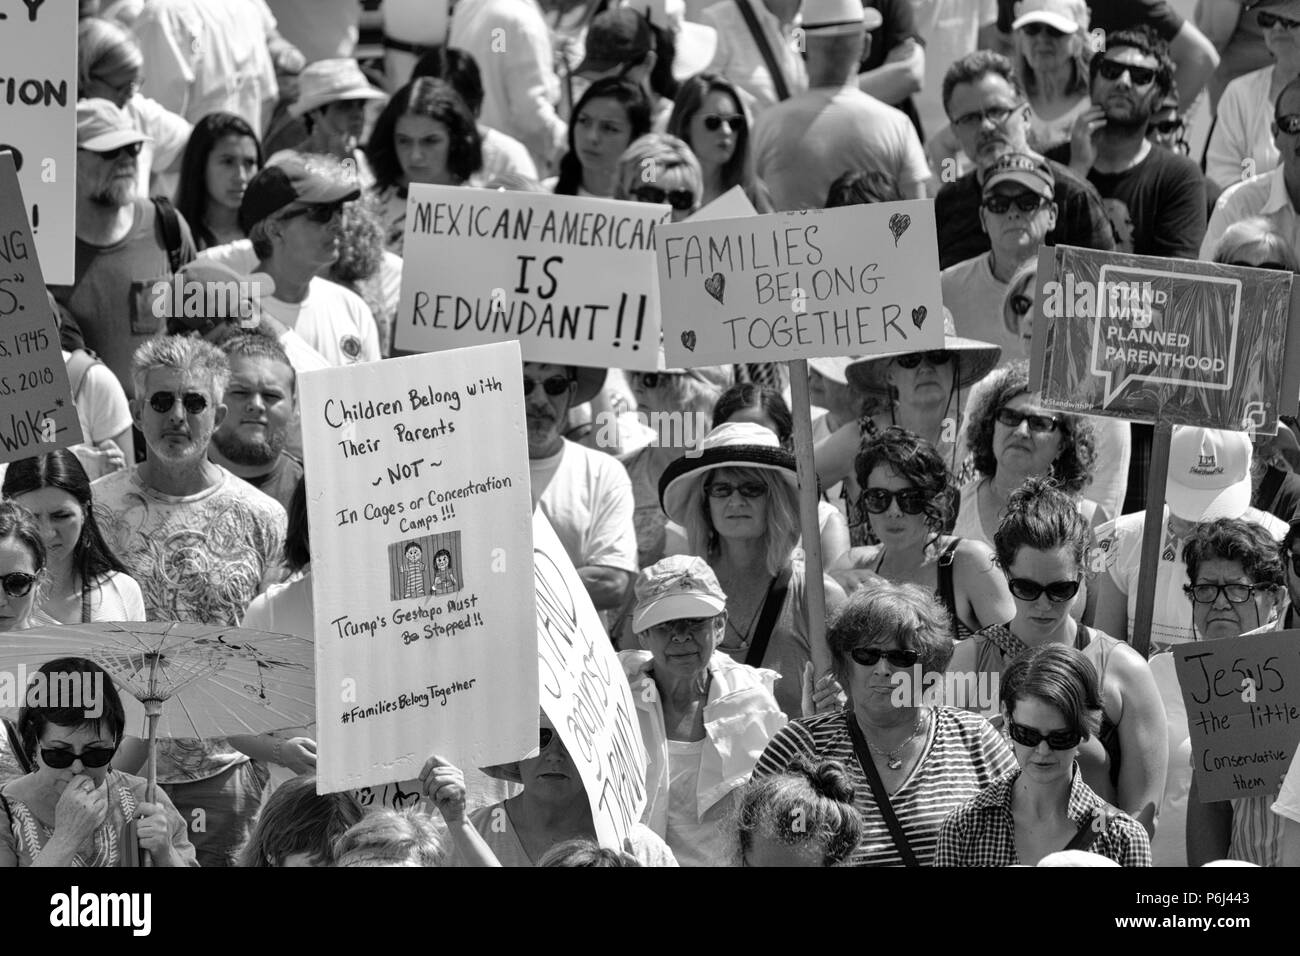 A crowd of protesters hold signs at the Families Belong Together rally in Asheville, NC, USA Stock Photo